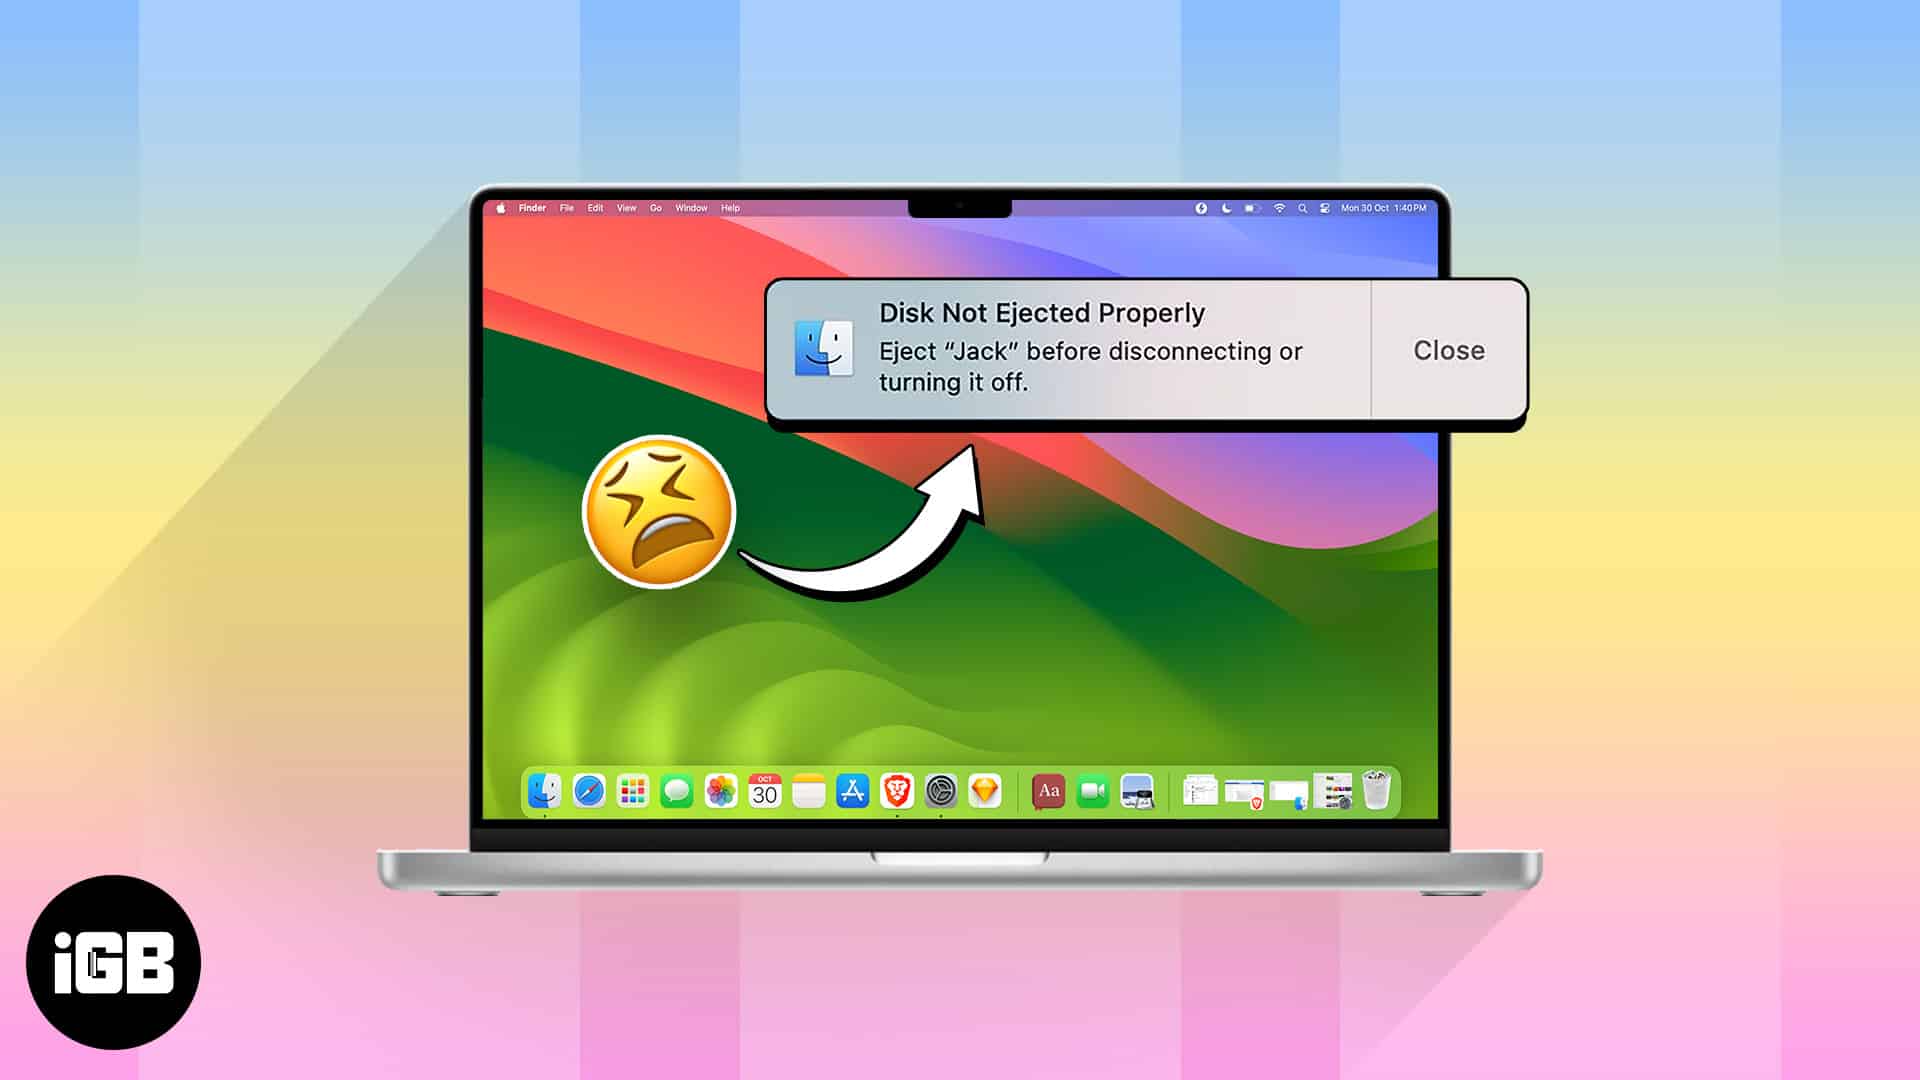 How to fix disk not ejected properly error on mac